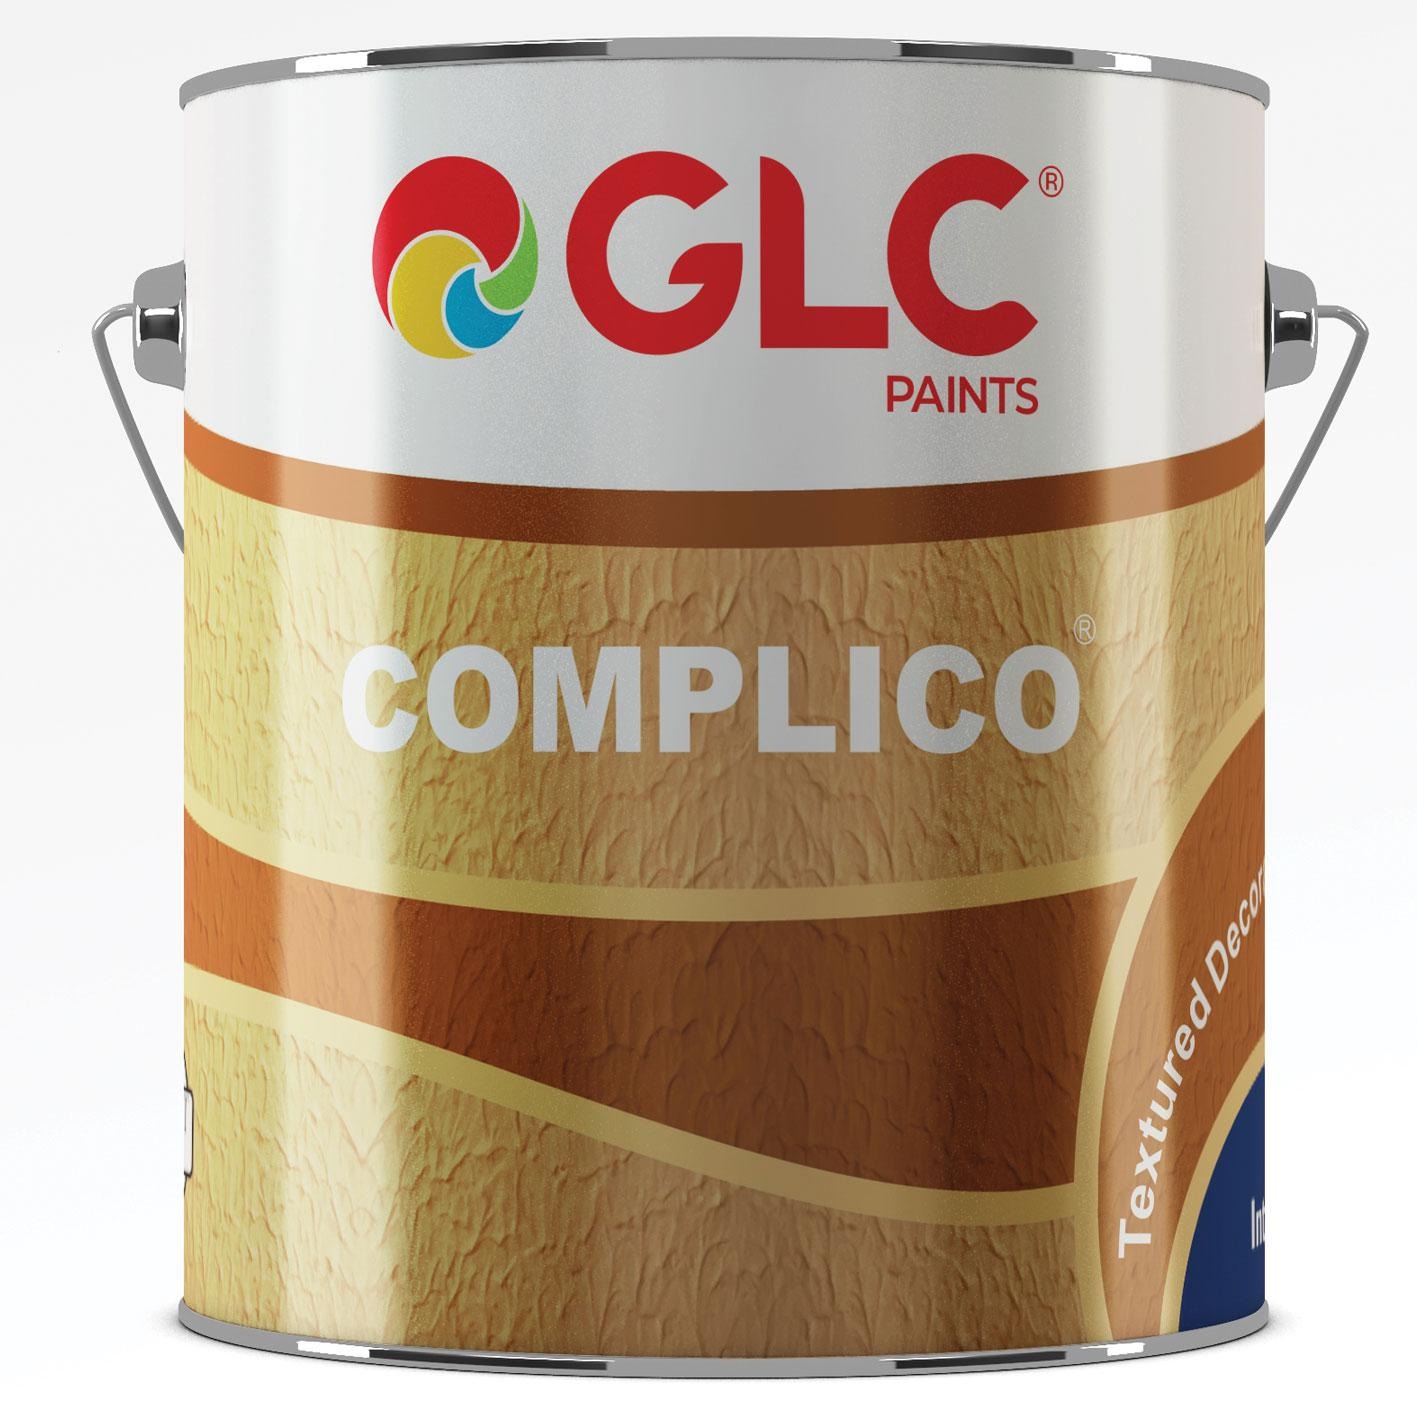 Complico Painting - 16 Kg